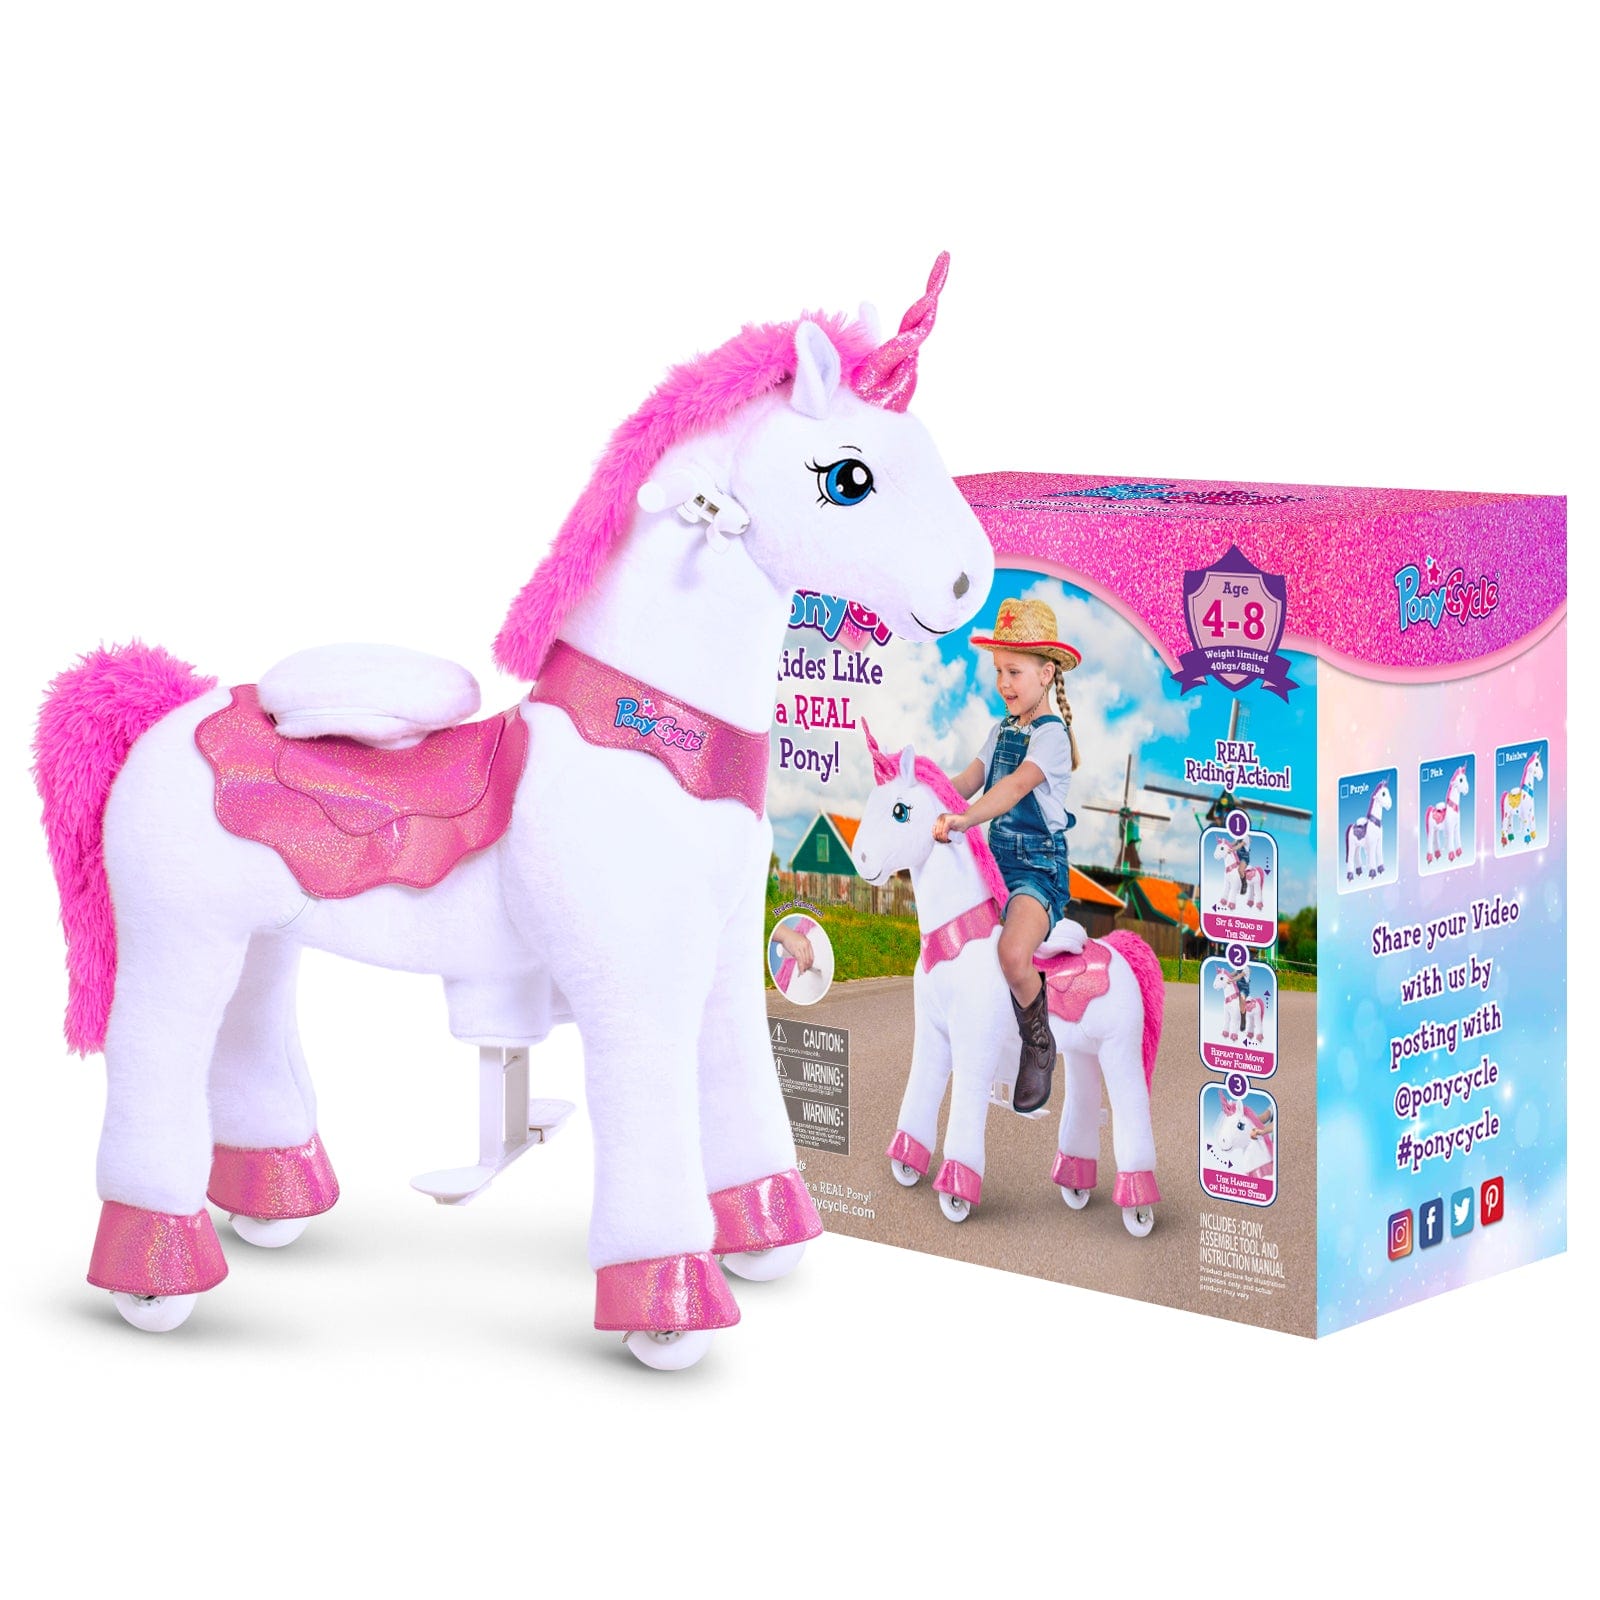 riding unicorn toy - packaging